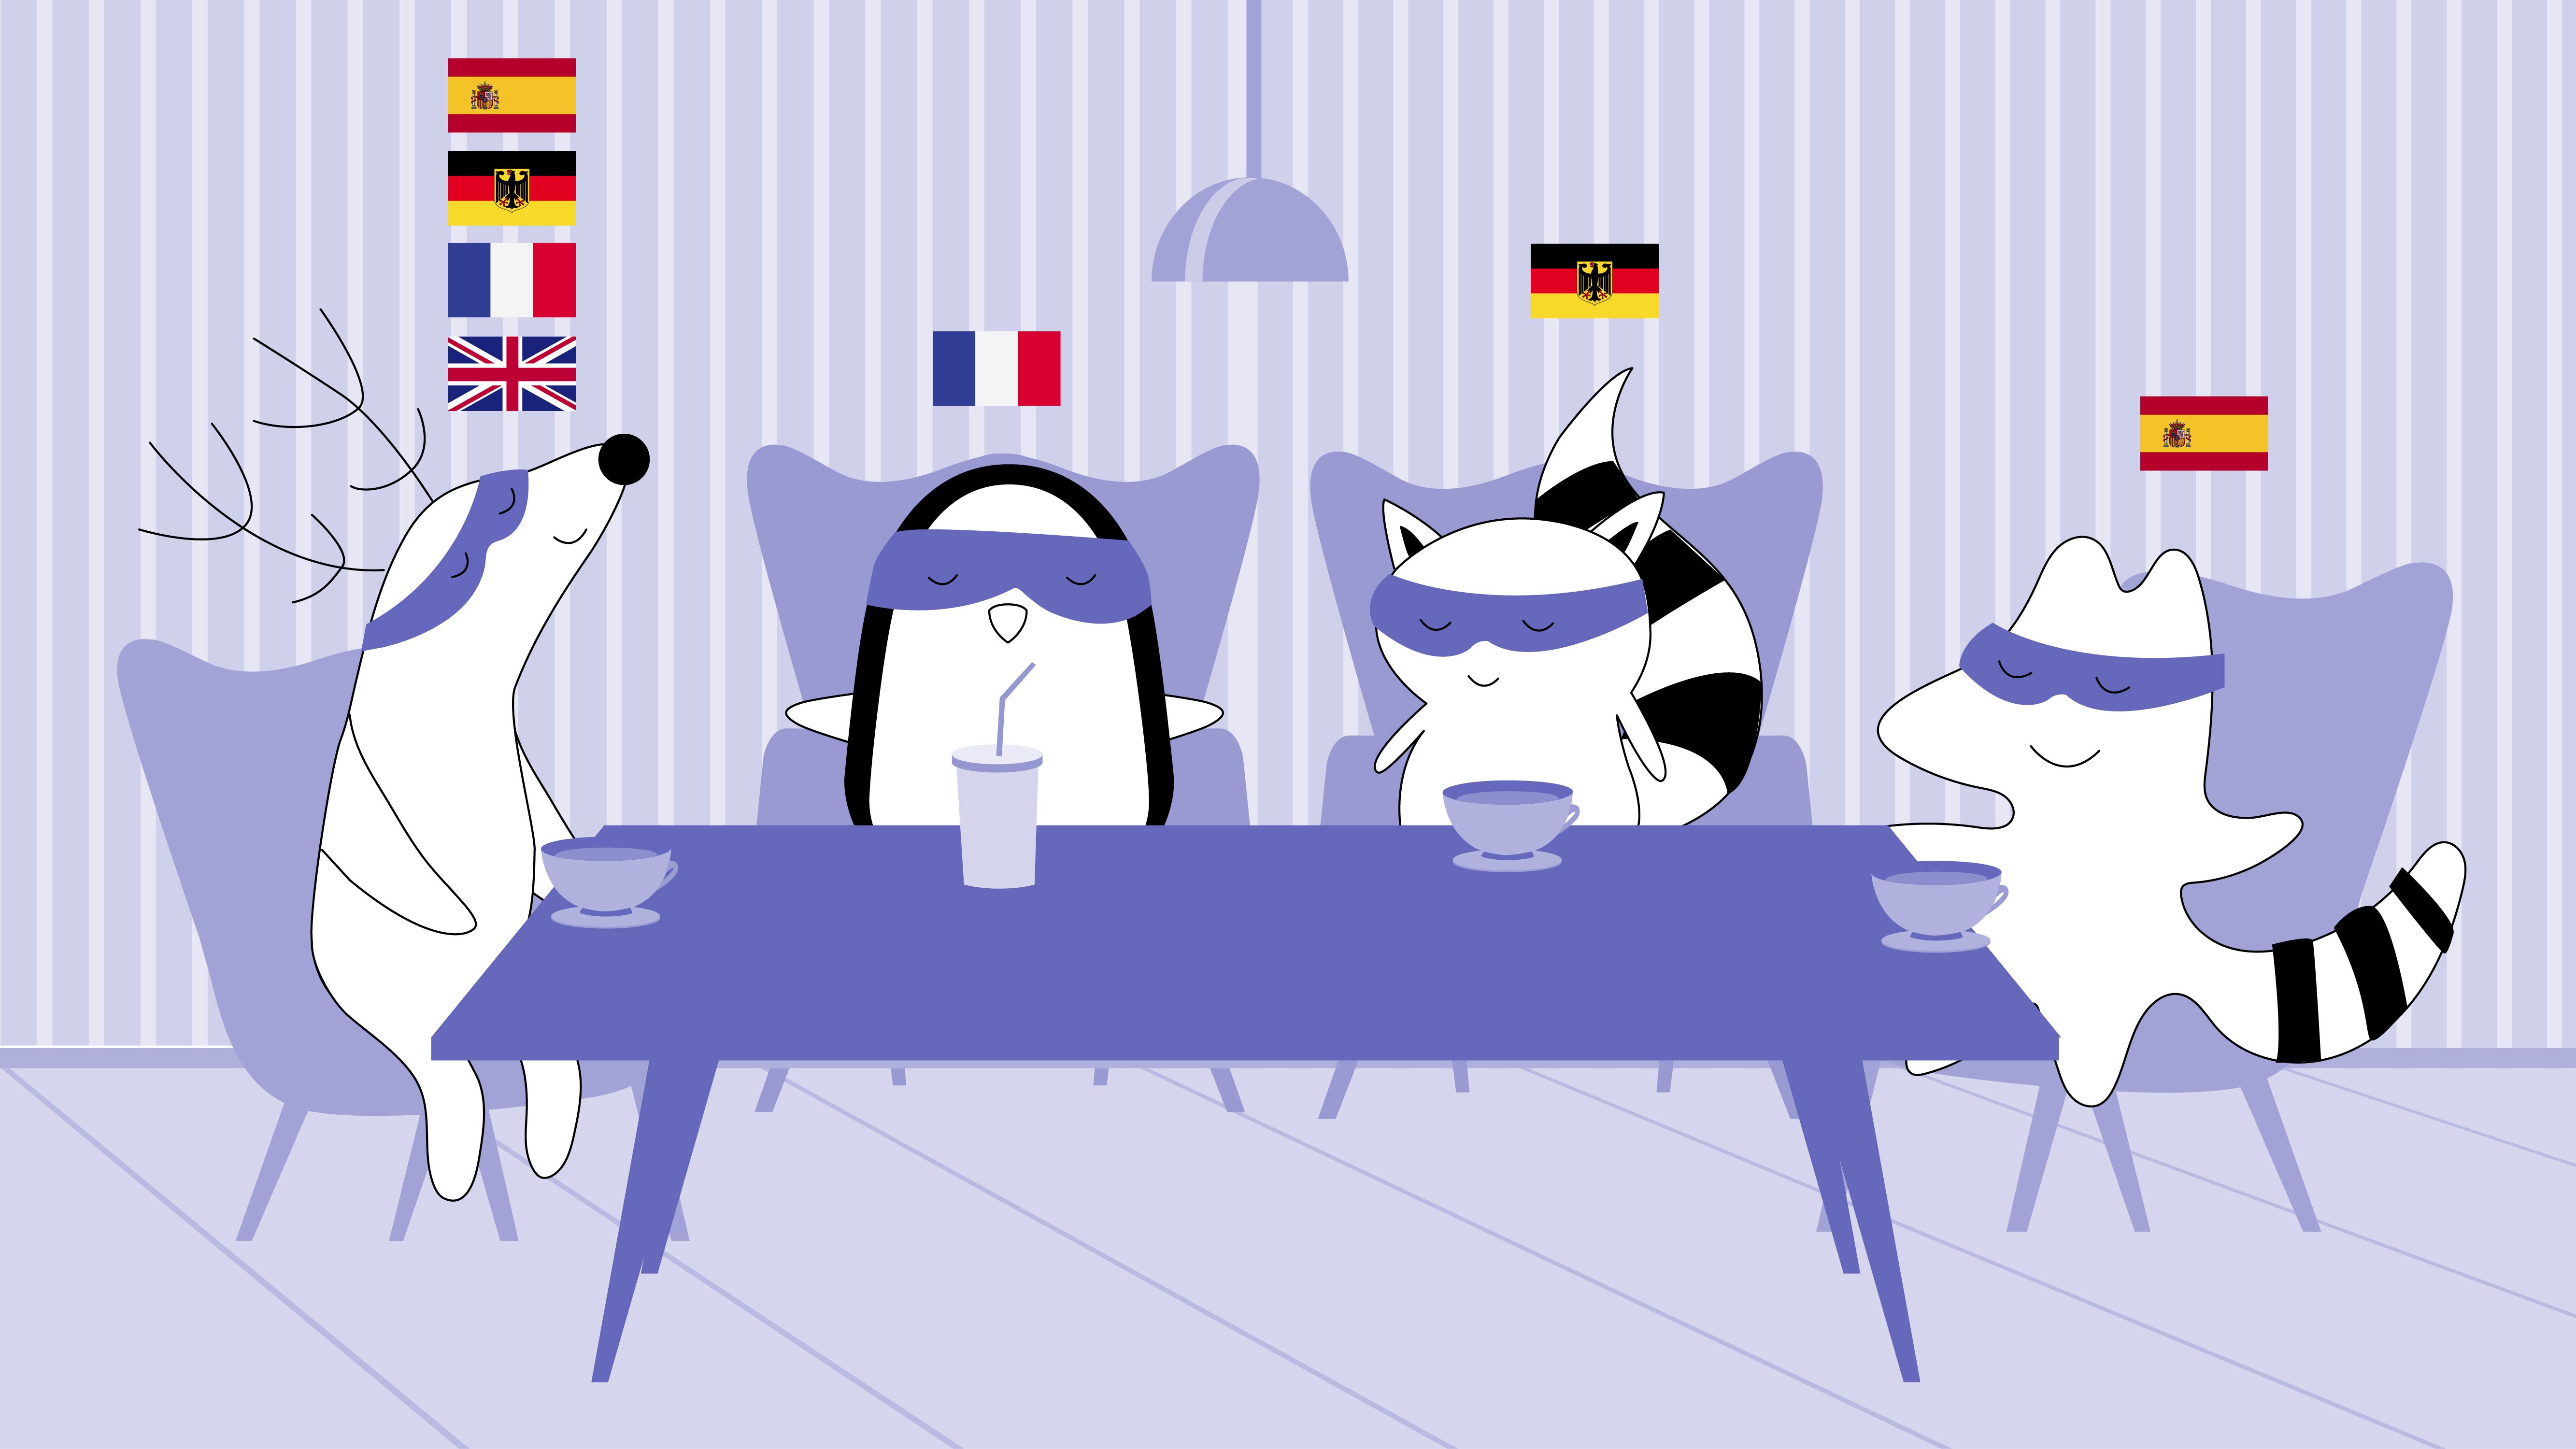 ] Soren, at the meeting, speaks to Iggy, Pocky, and Benji in different languages.